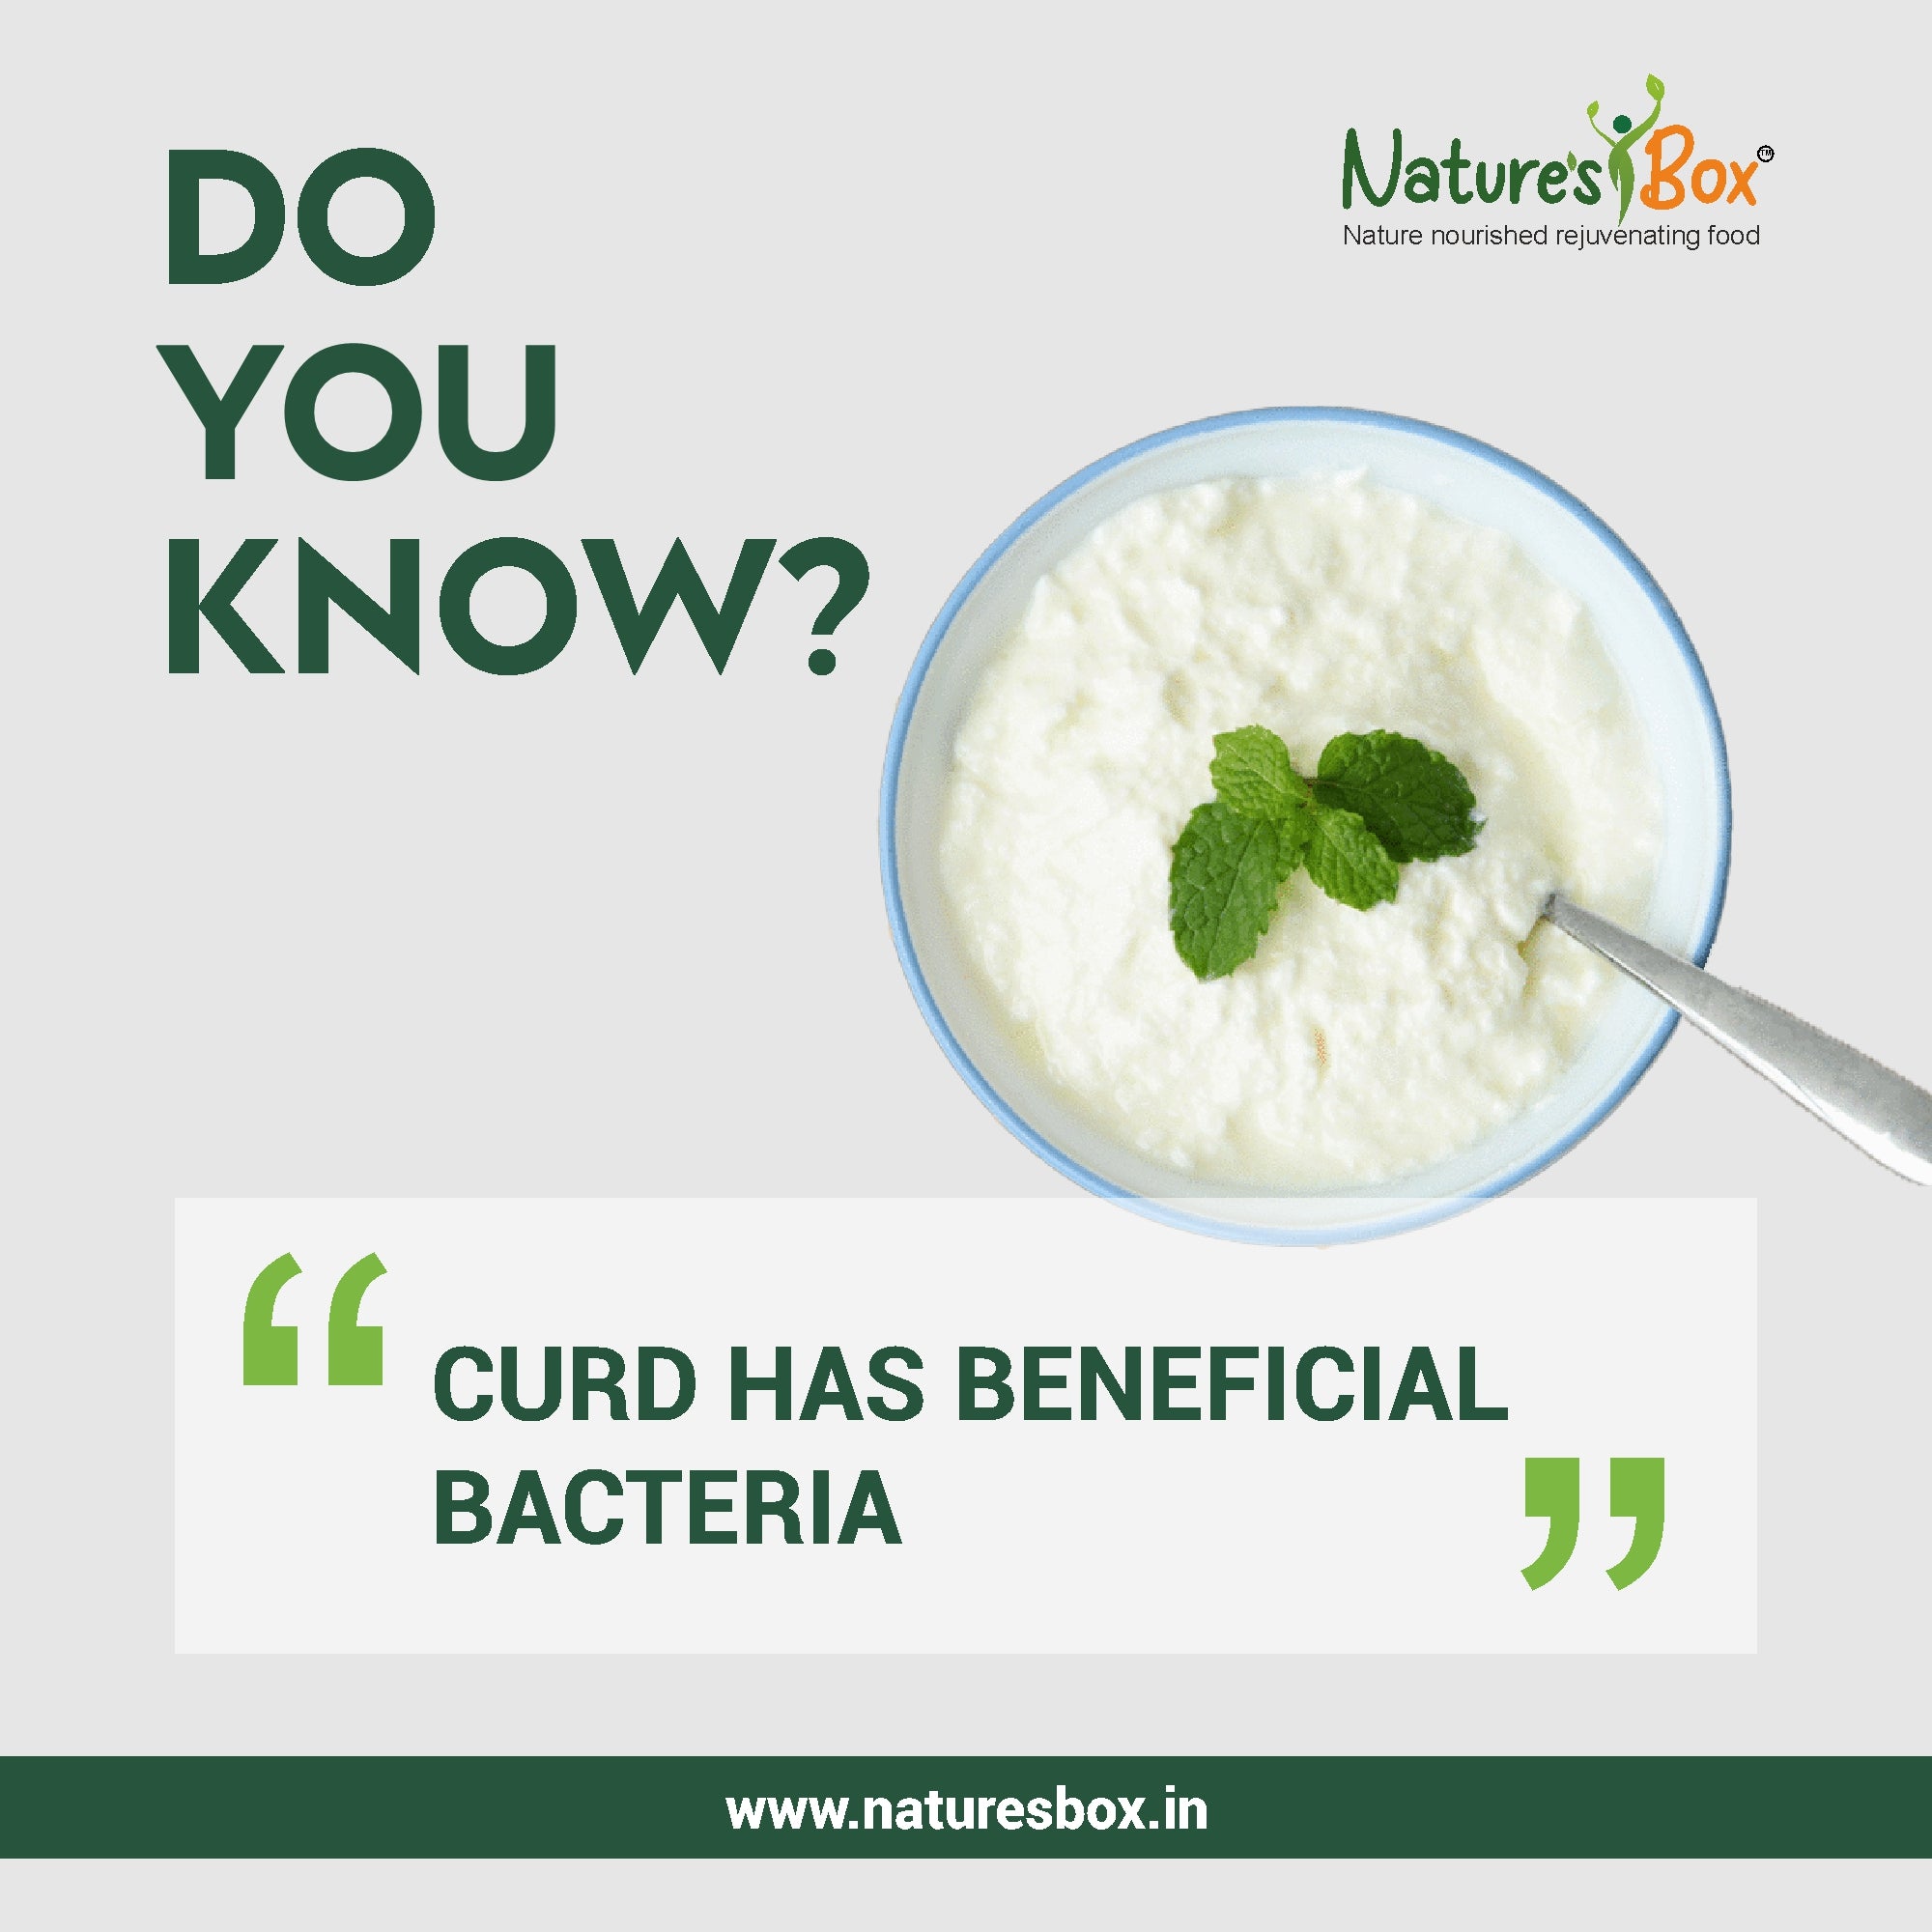 The Good Bacteria of Curd Keeps You Healthy